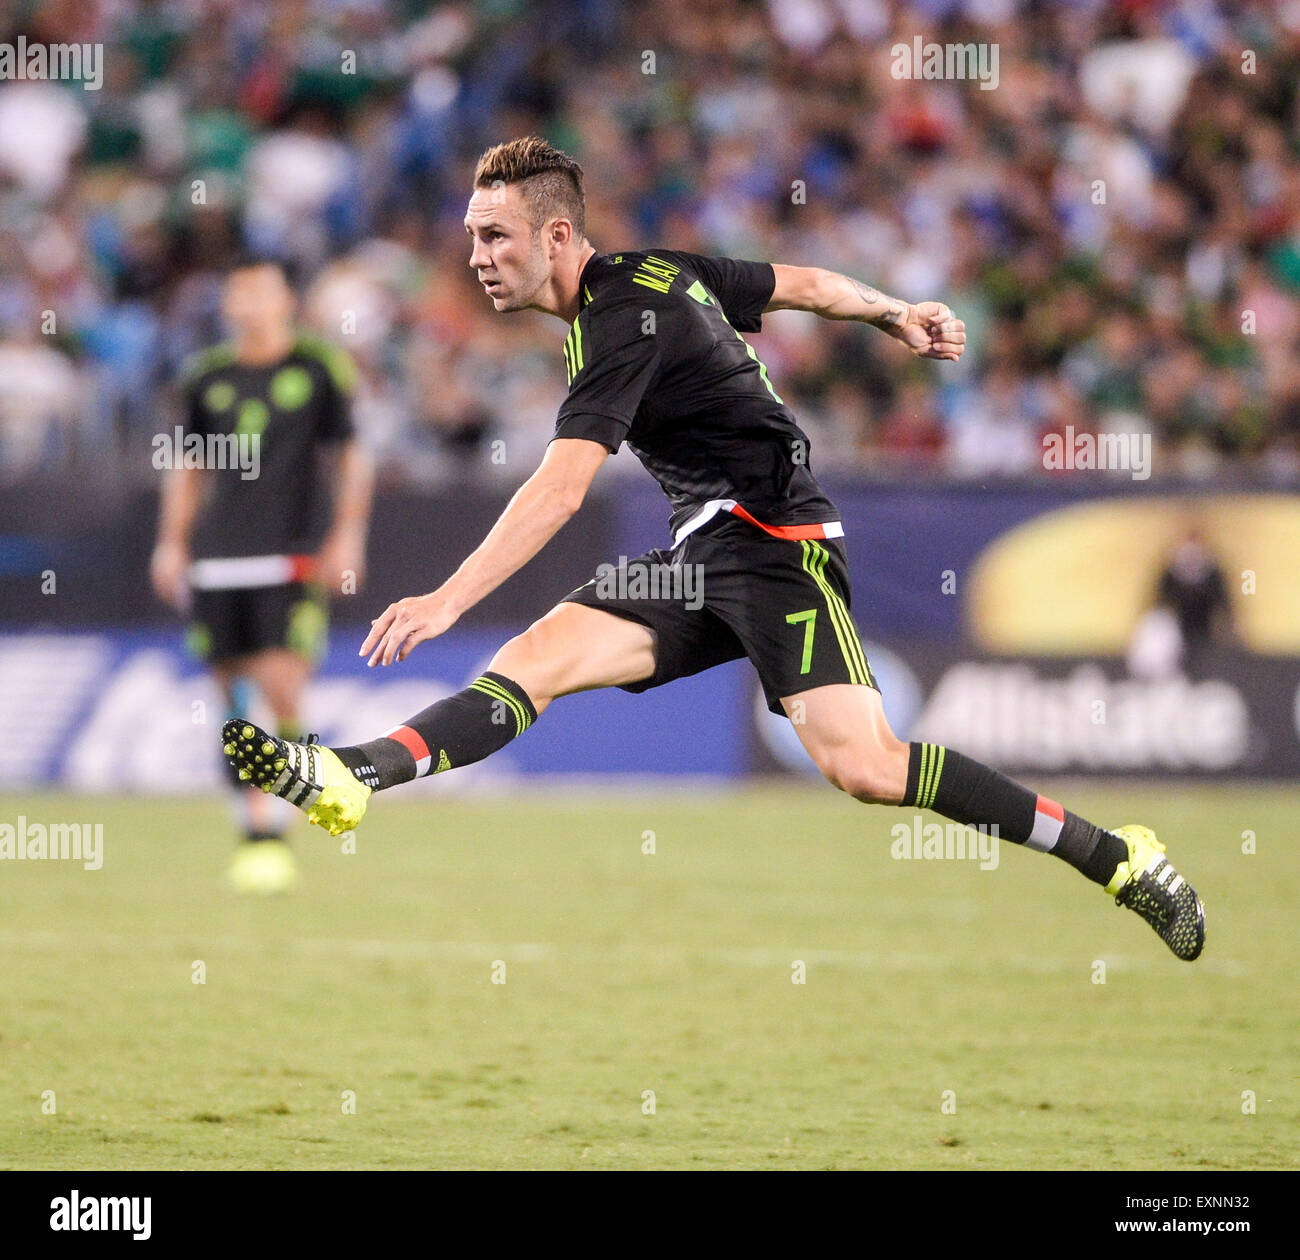 Charlotte, North Carolina, USA. 15th July, 2015. Mexico defender Miguel Layun (7) watches his kick sail over the goal post during the 2015 CONCACAF Gold Cup Group C match between Mexico and Trinidad & Tobago at Bank of America Stadium in Charlotte, North Carolina. PJ Ward-Brown/Cal Sport Media/Alamy Live News Stock Photo